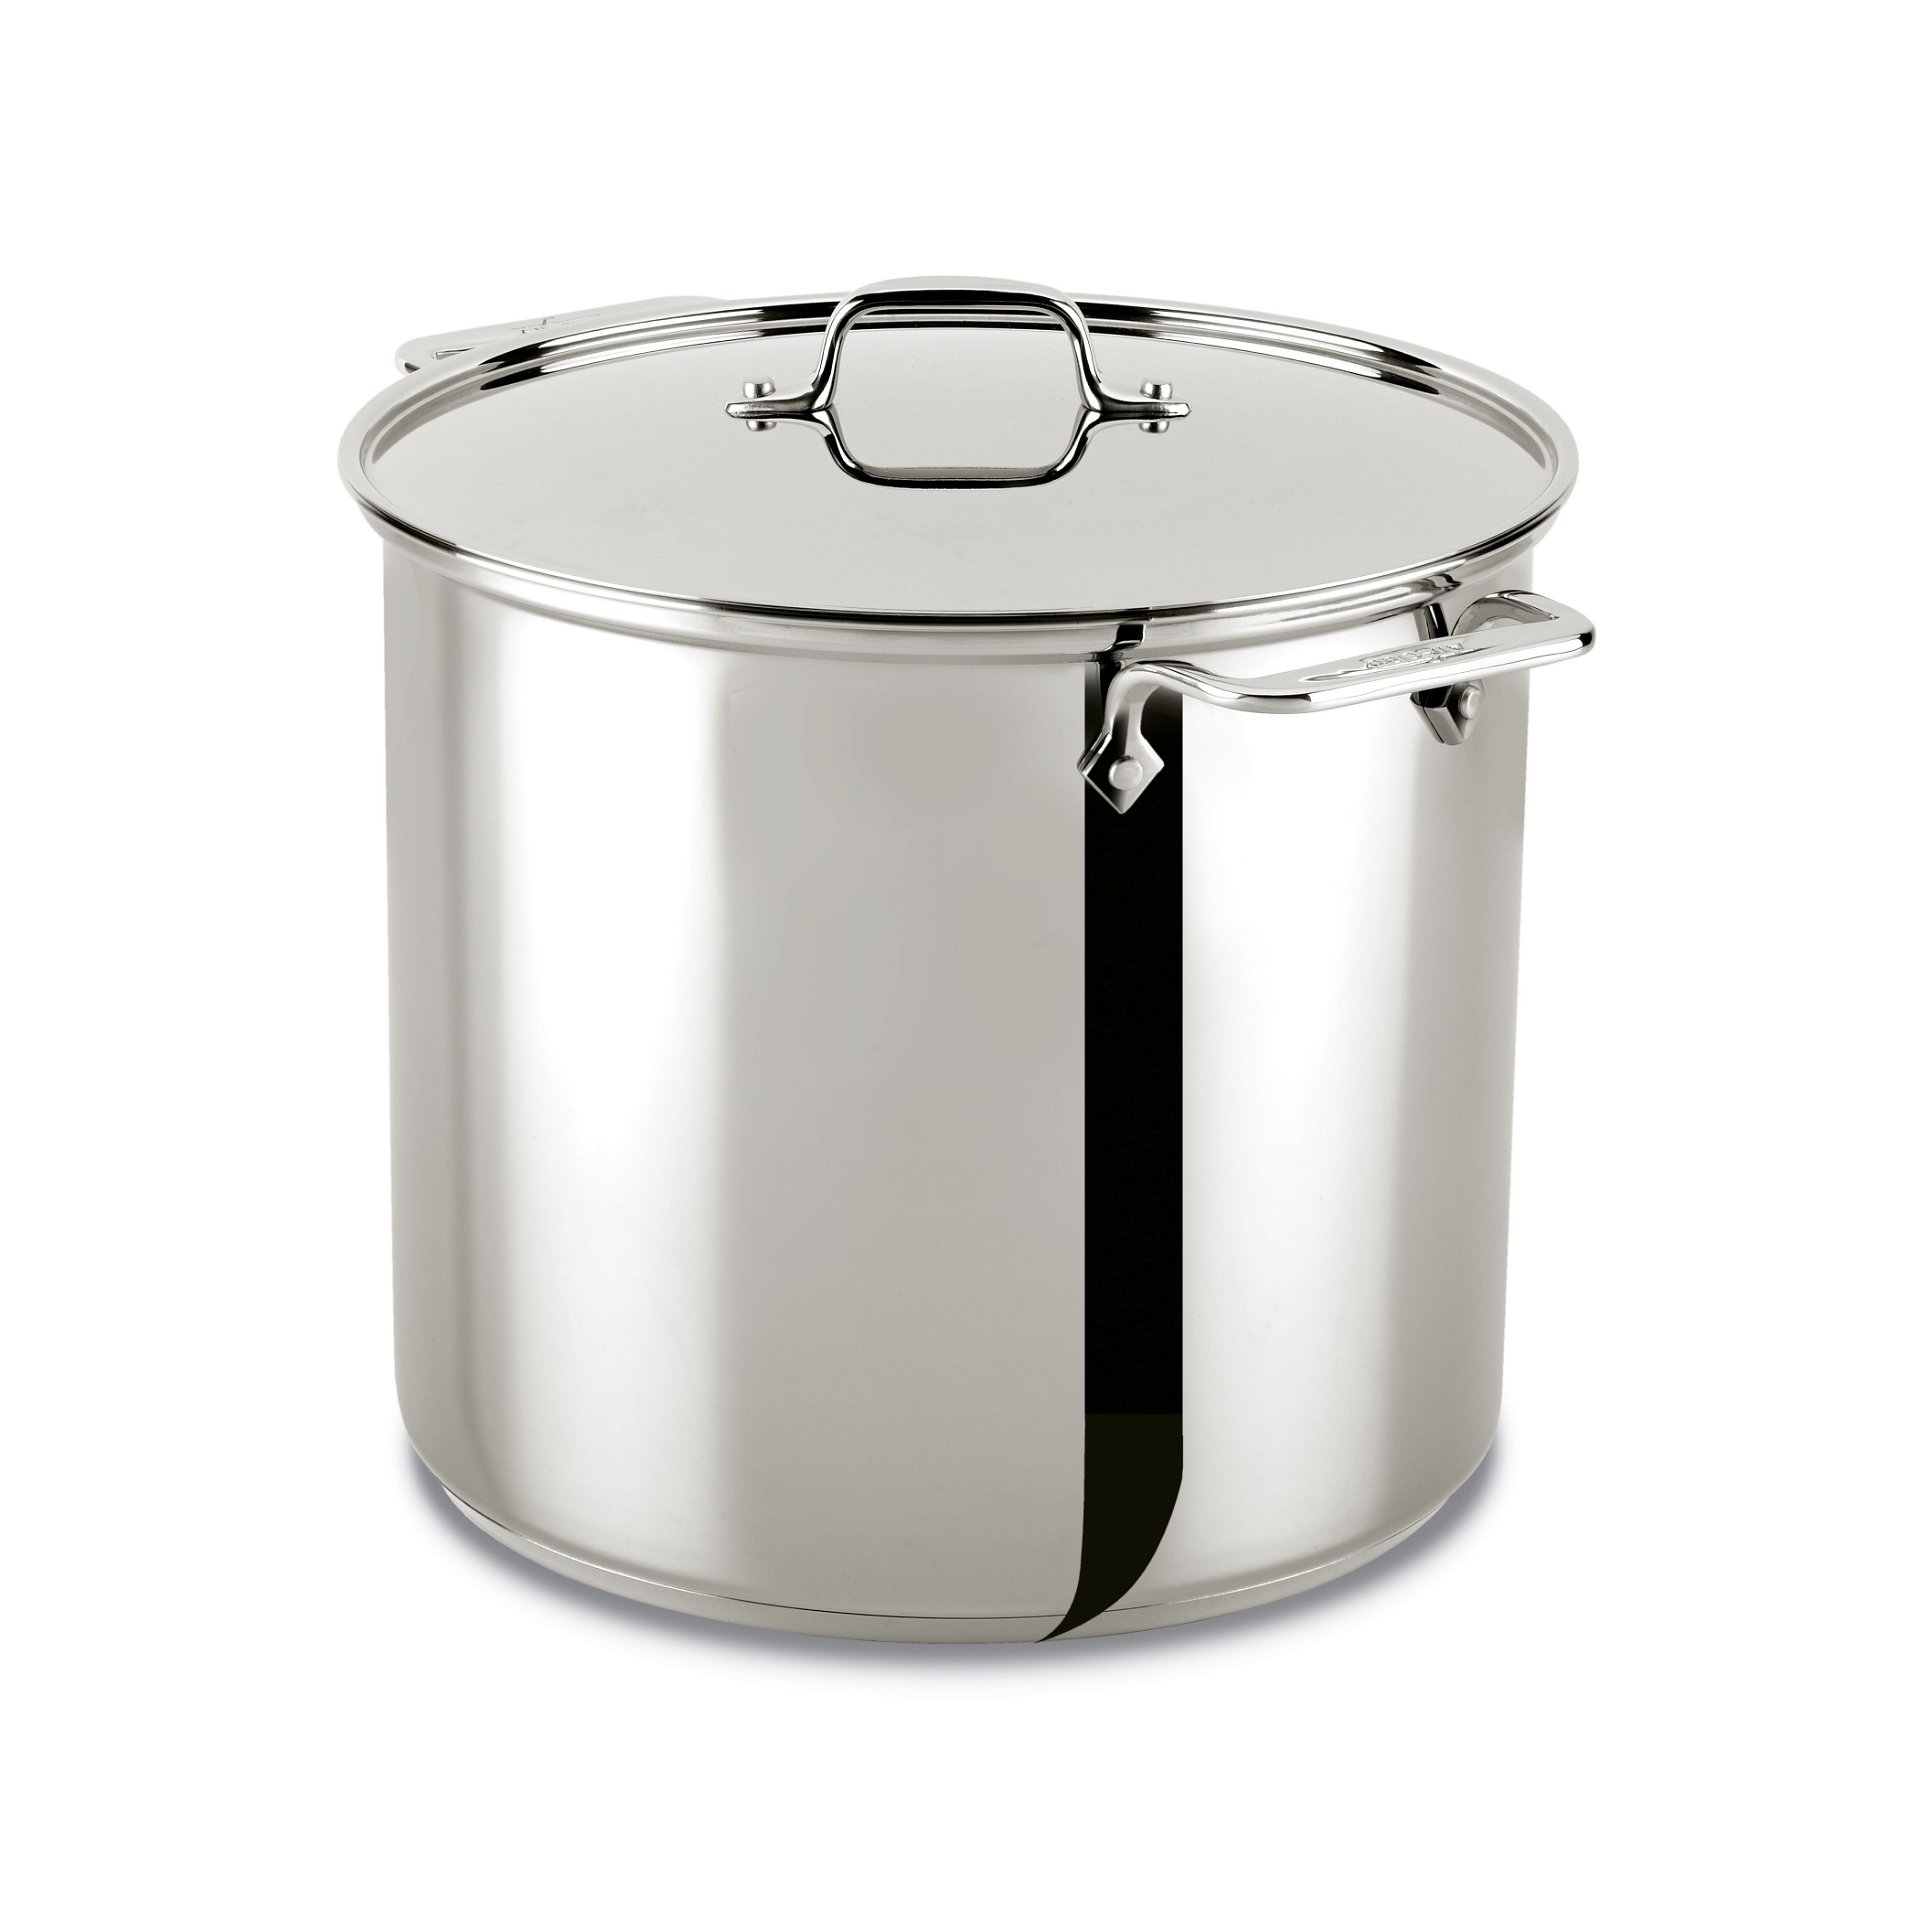 Source commercial stainless steel electric cooking pots,fast hot electric  boiling water pot,stainless steel travel wide kettle on m.